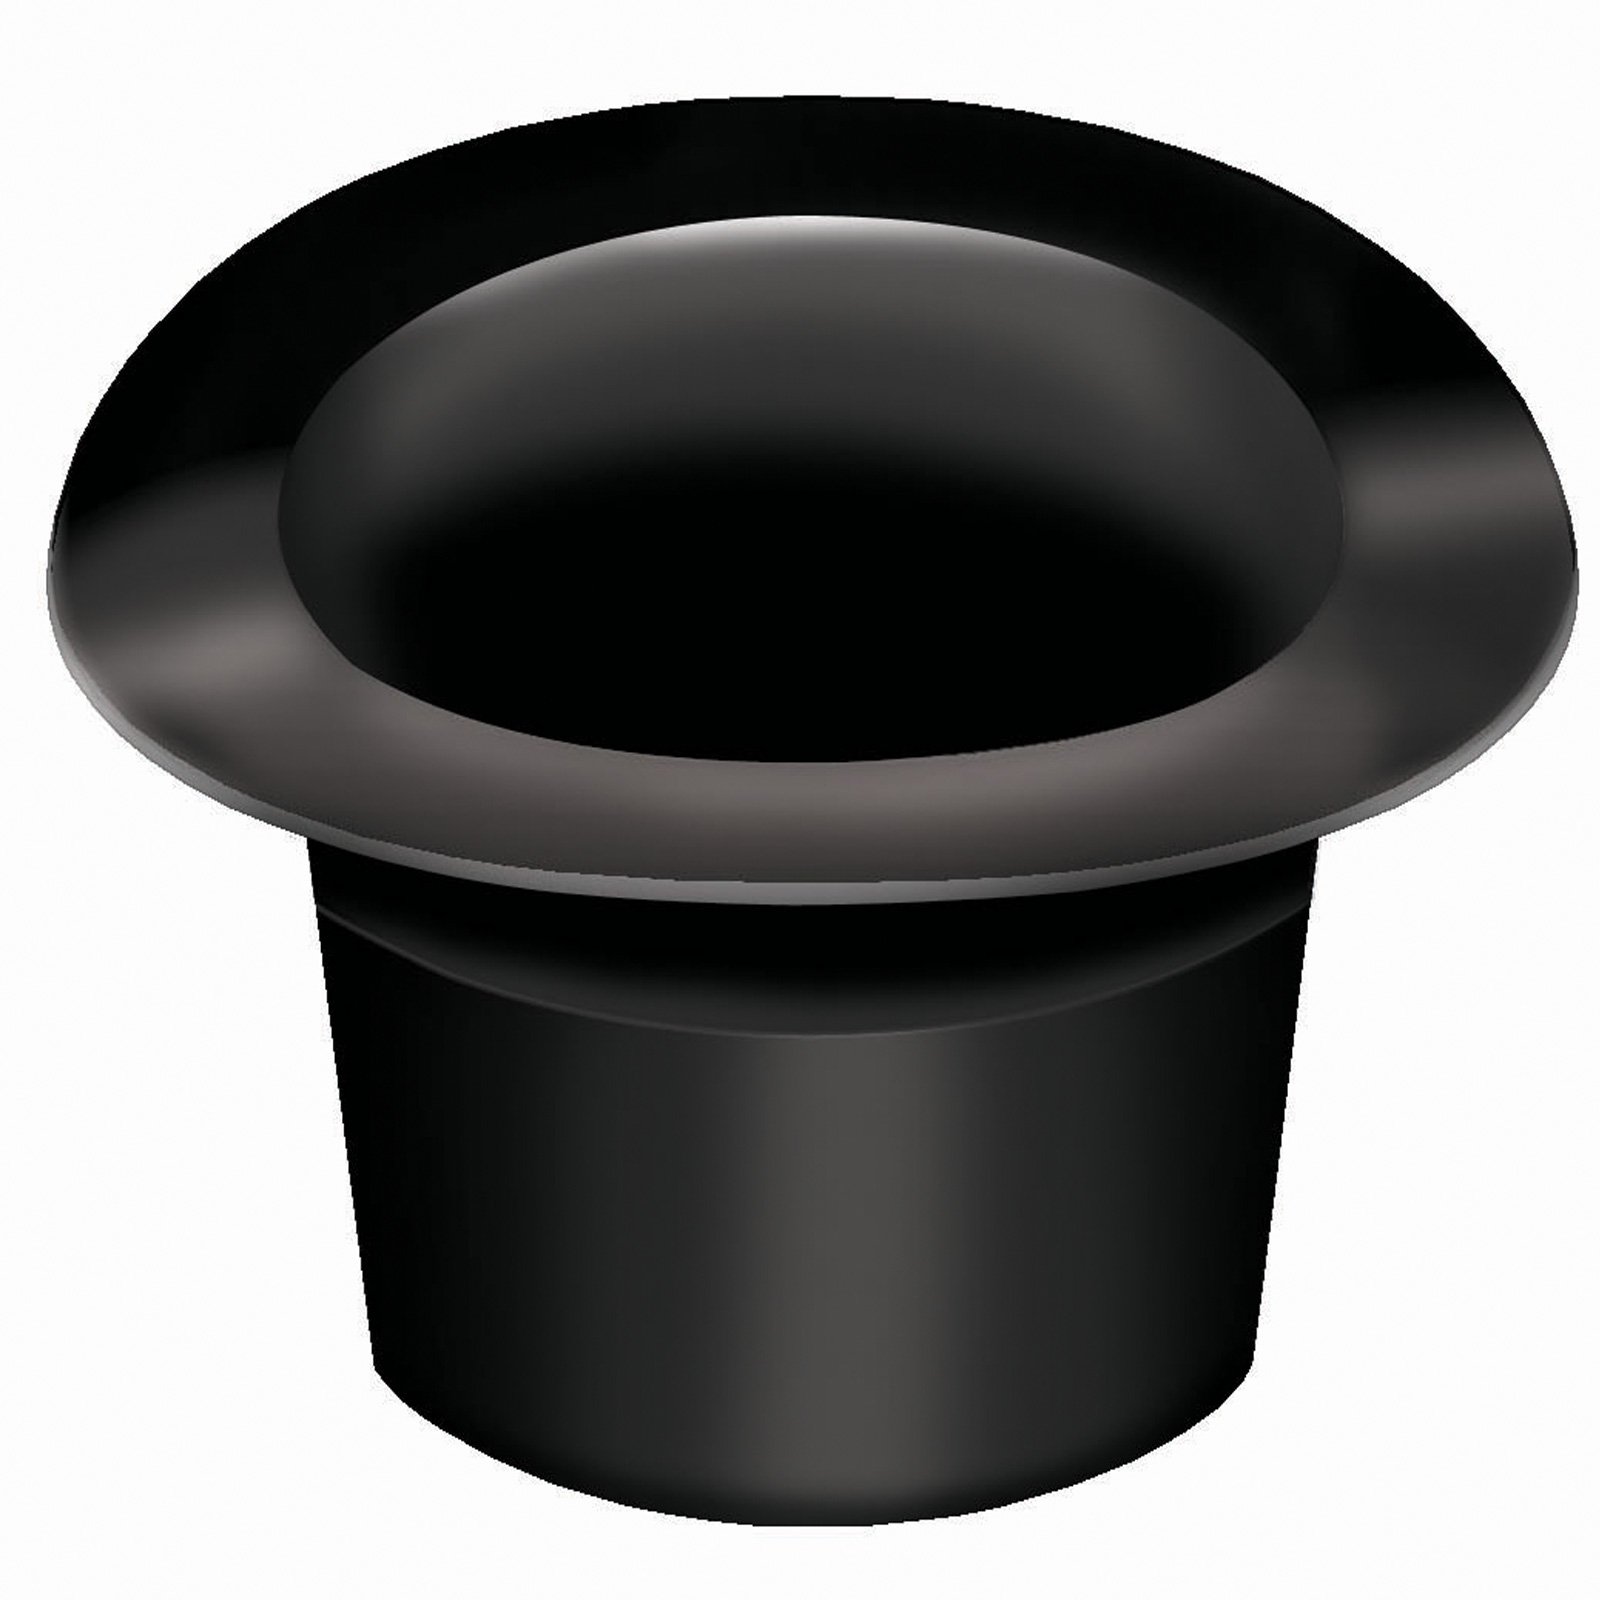 28 Top Hat Picture Free Cliparts That You Can Download To You Computer